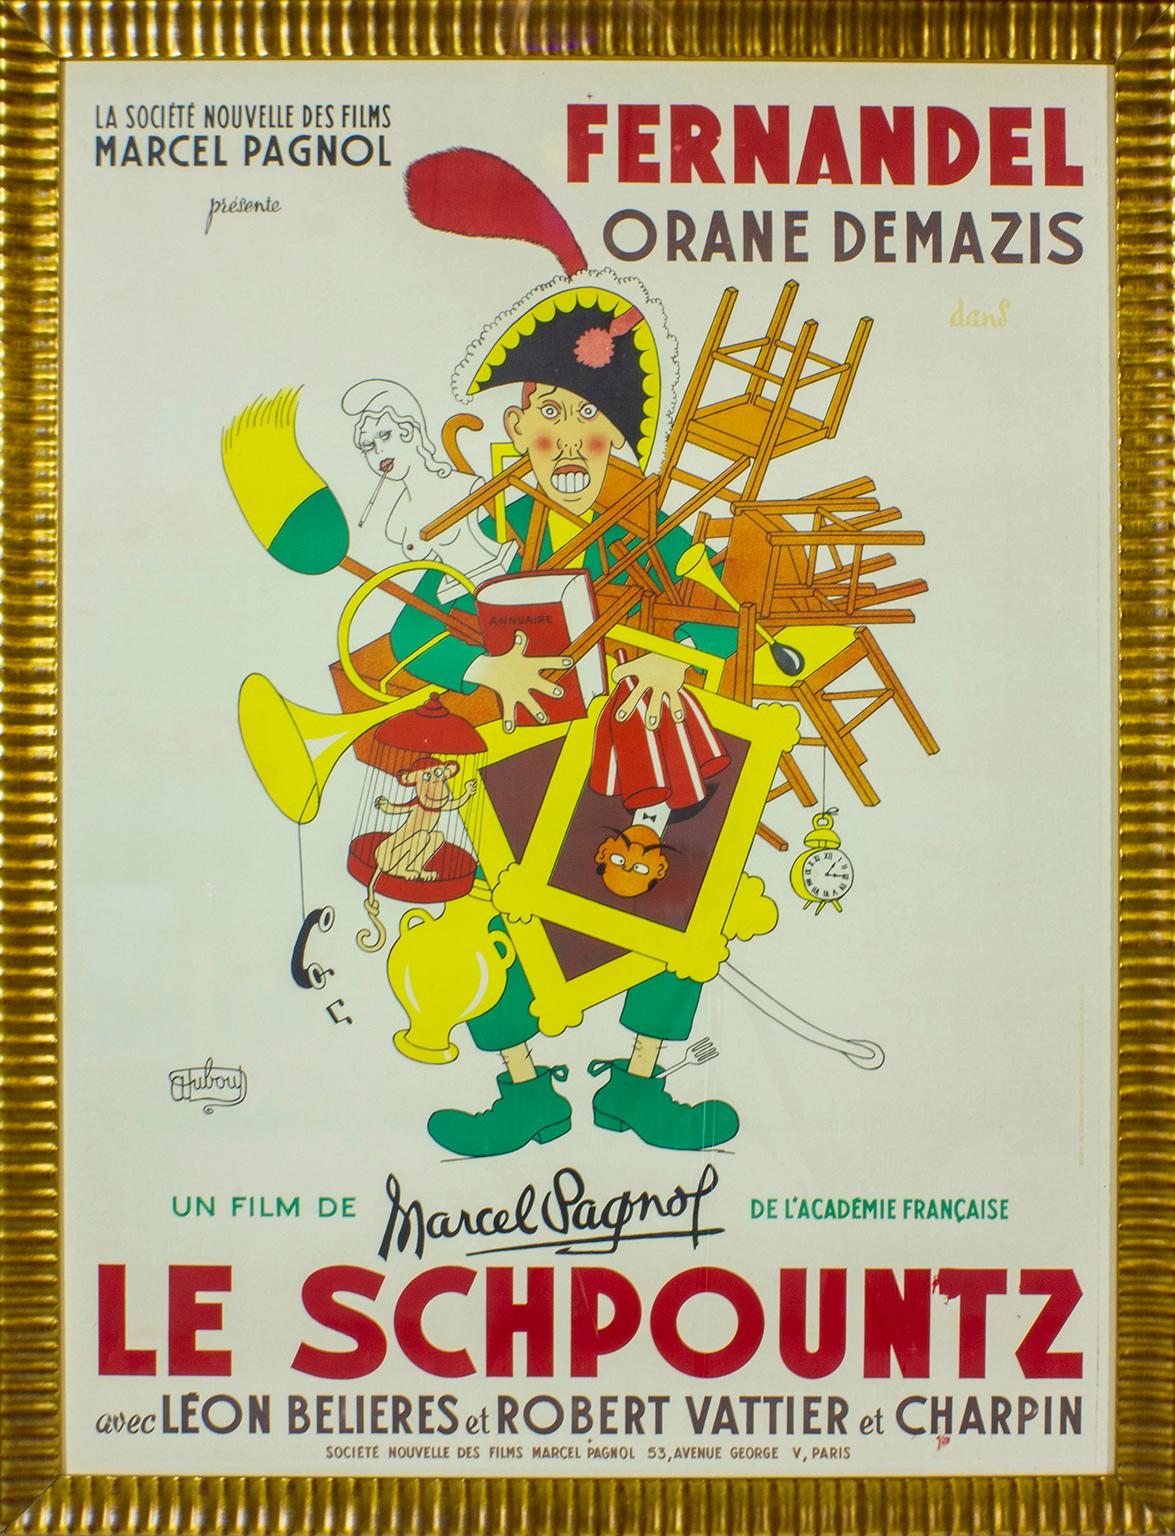 "Le Schpountz" original 1952 movie poster by artist Albert Dubout. Created for 1952 revival by the French Société Nouvelle des Films of the 1938 movie, "Le Schpountz" directed by Marcel Pagnol and starring Fernandel as a shopkeeper who inadvertently